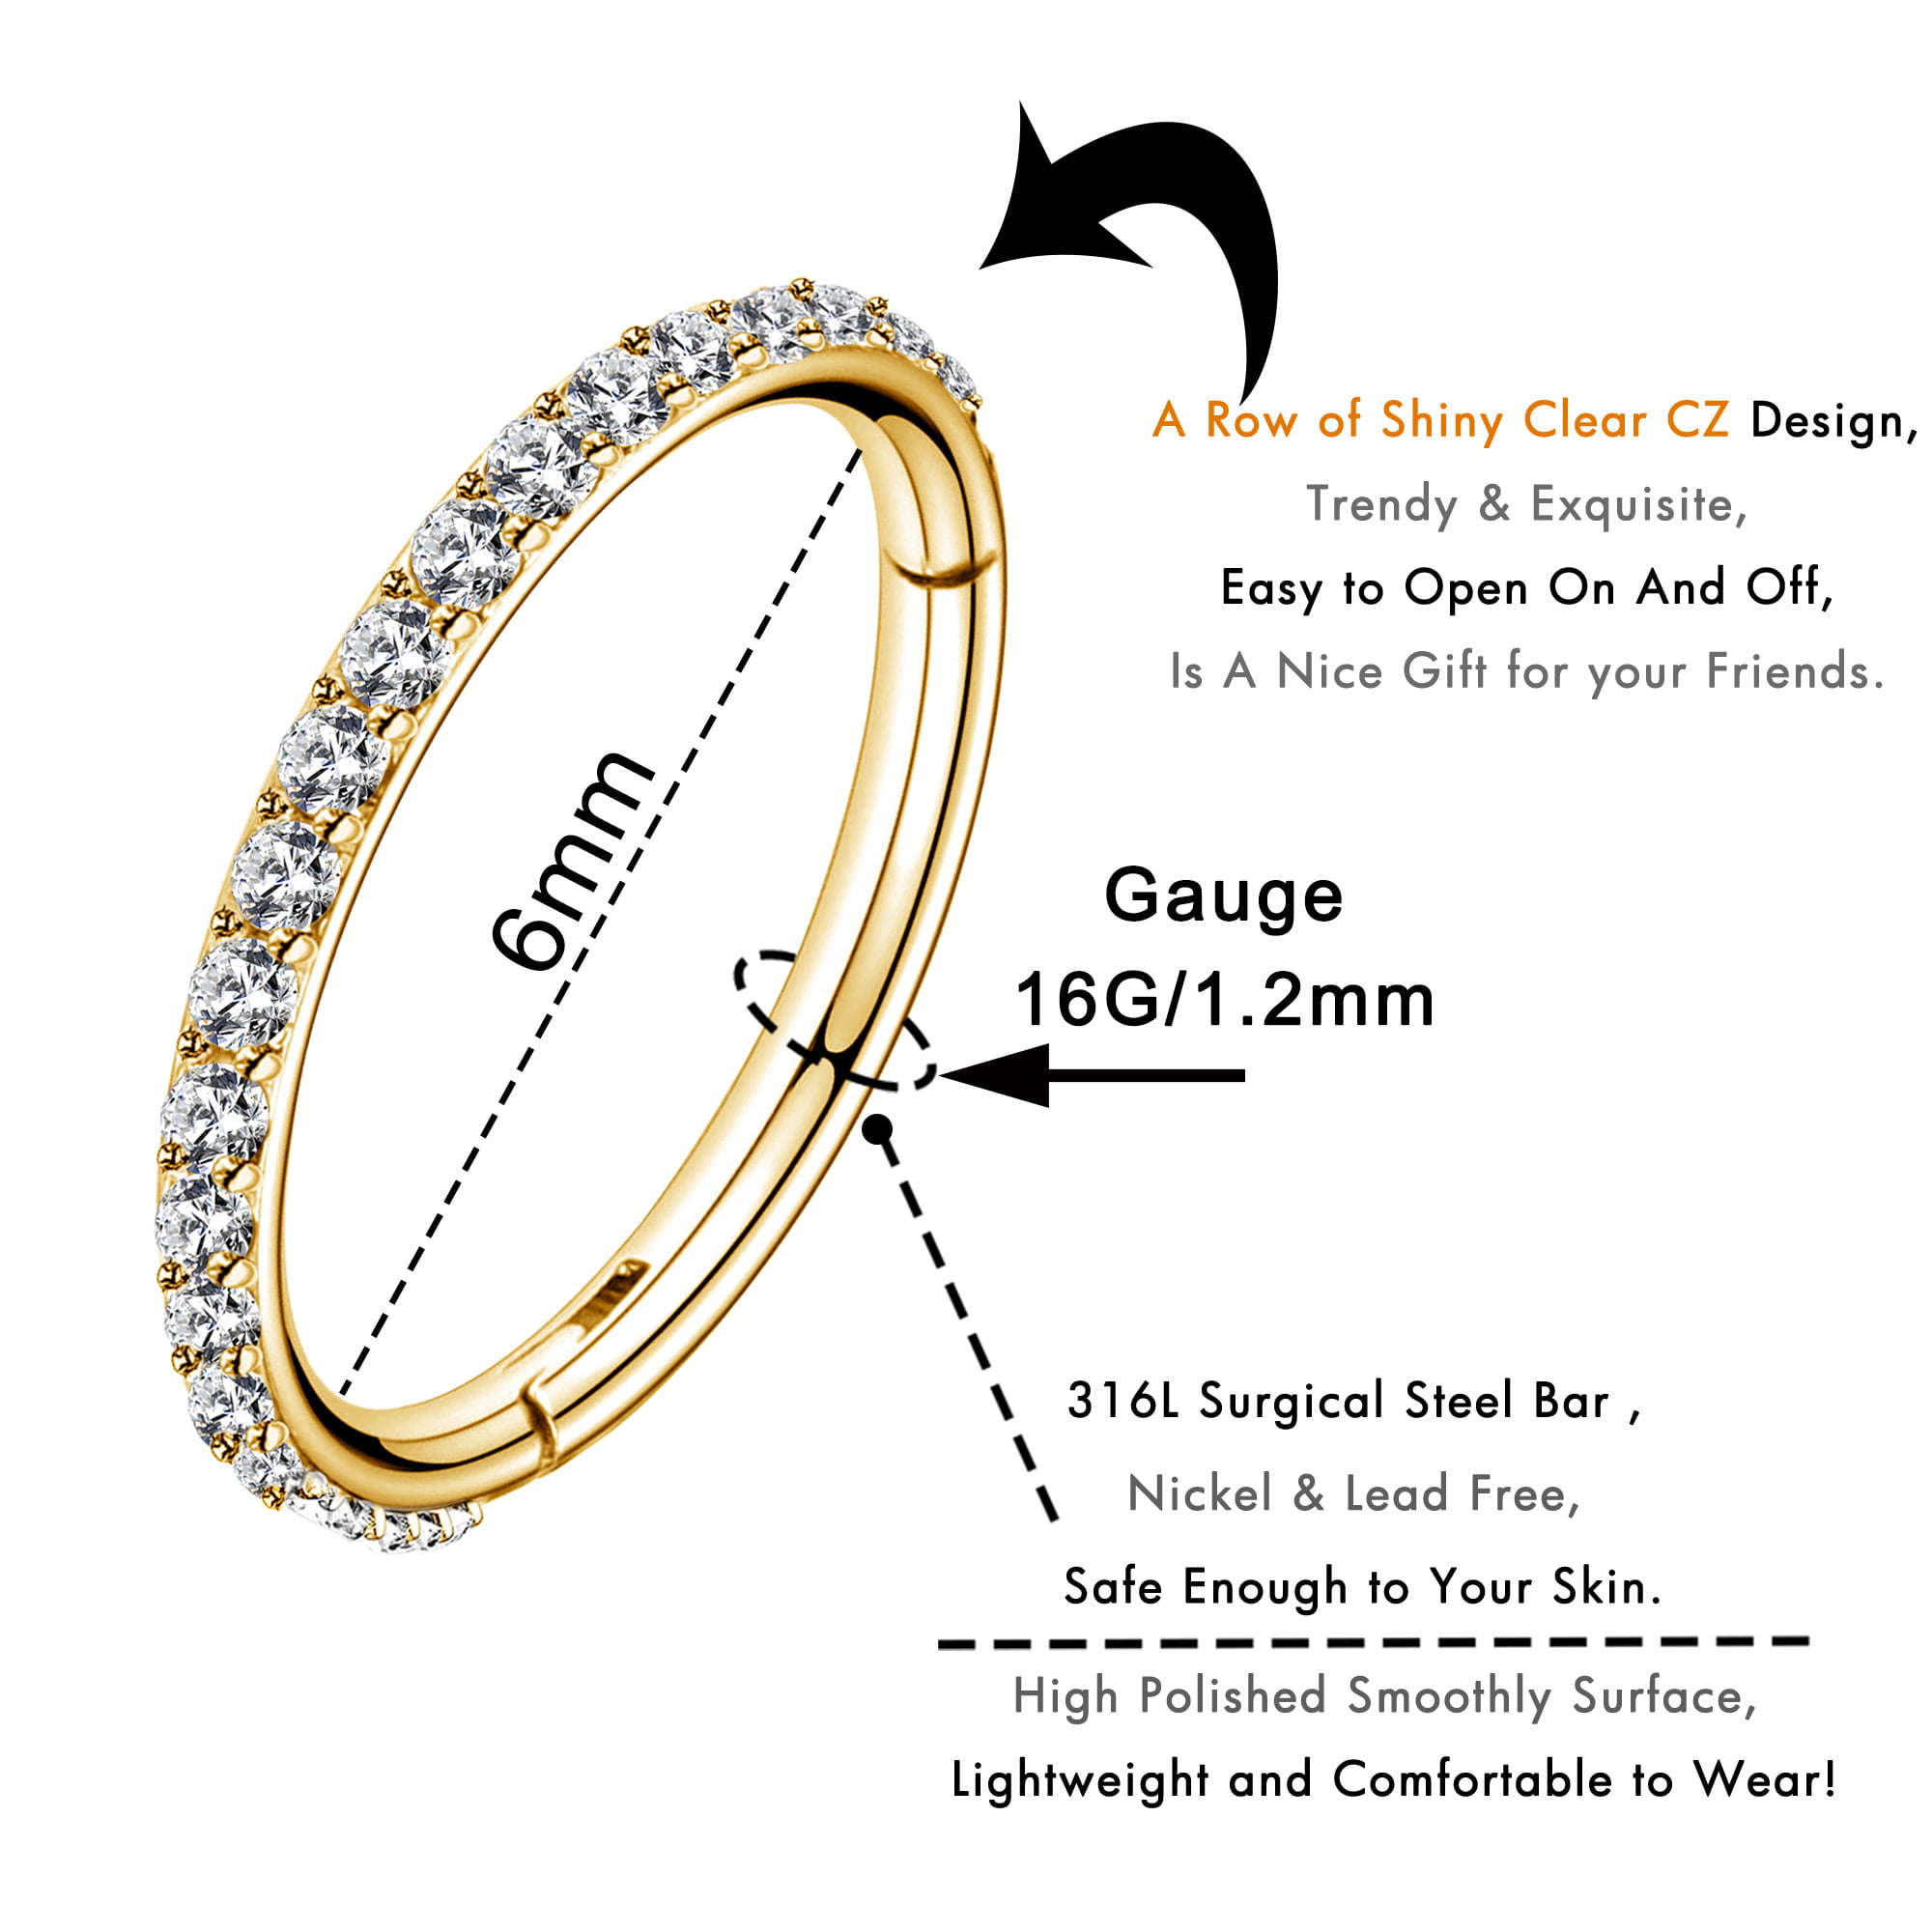 OUFER Gold Hinged Segment Earring Hoop 16G Stainless Steel with Cartilage Earrings Clear CZ Paved Tragus Helix Earrings Cartilage Earring Septum Nose Ring Hoop 